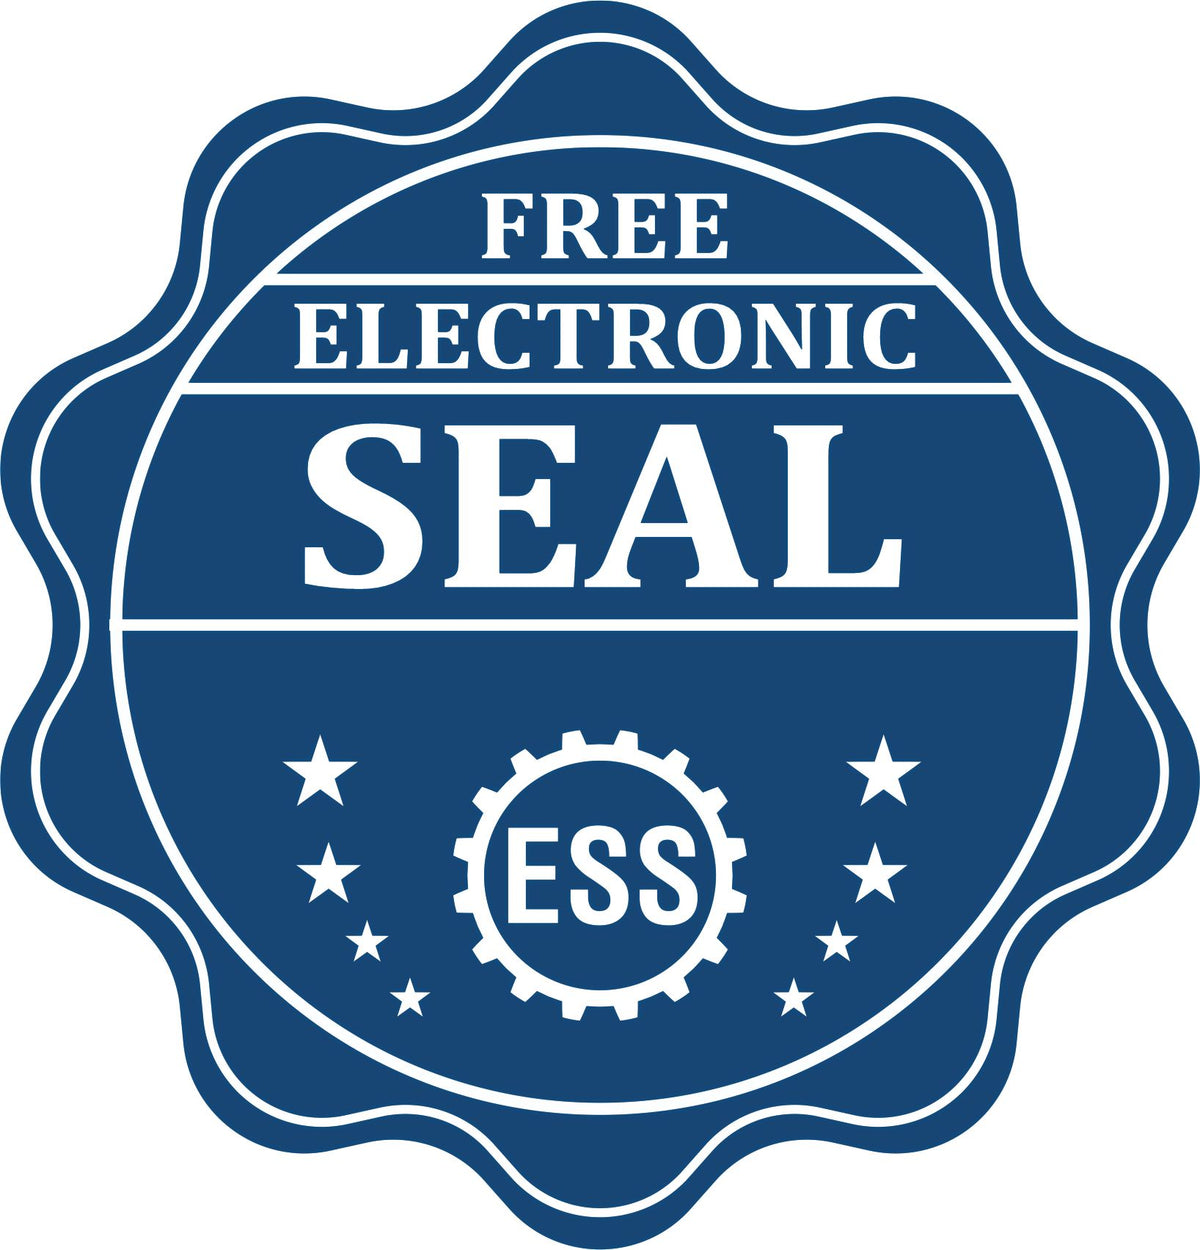 A badge showing a free electronic seal for the Soft Pocket Tennessee Landscape Architect Embosser with stars and the ESS gear on the emblem.